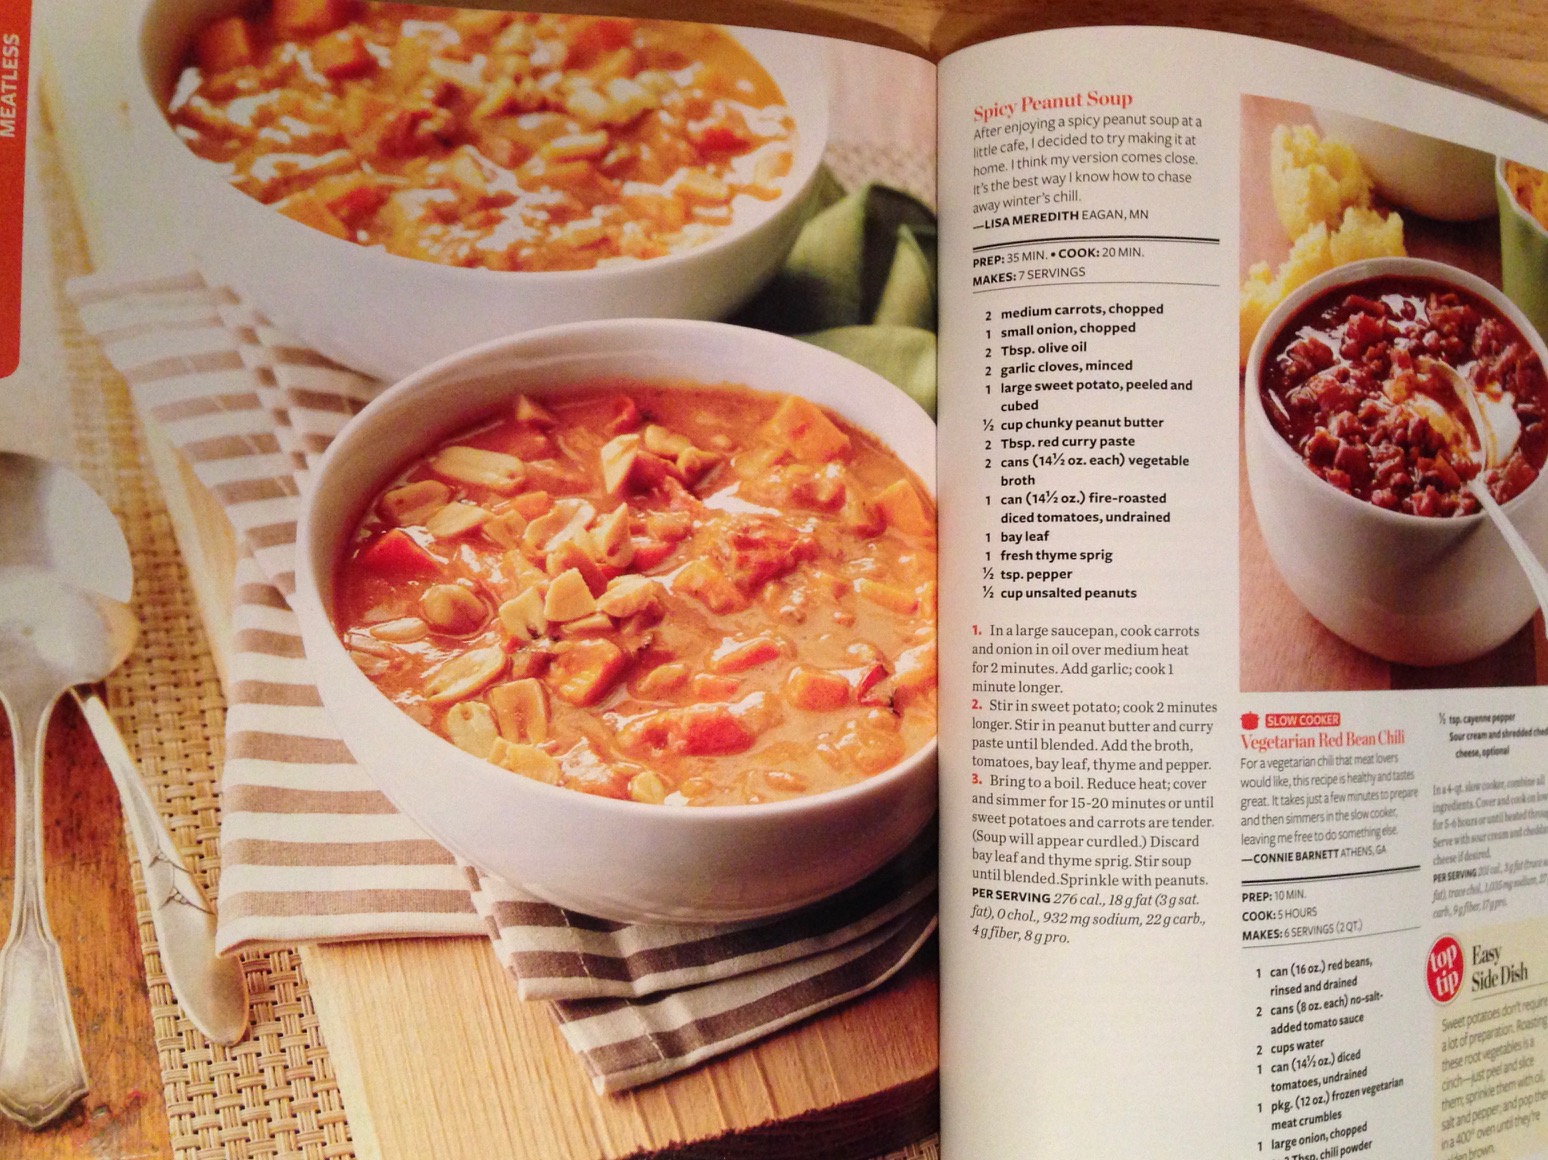 Spicy Peanut Soup Feature in Taste of Home magazine